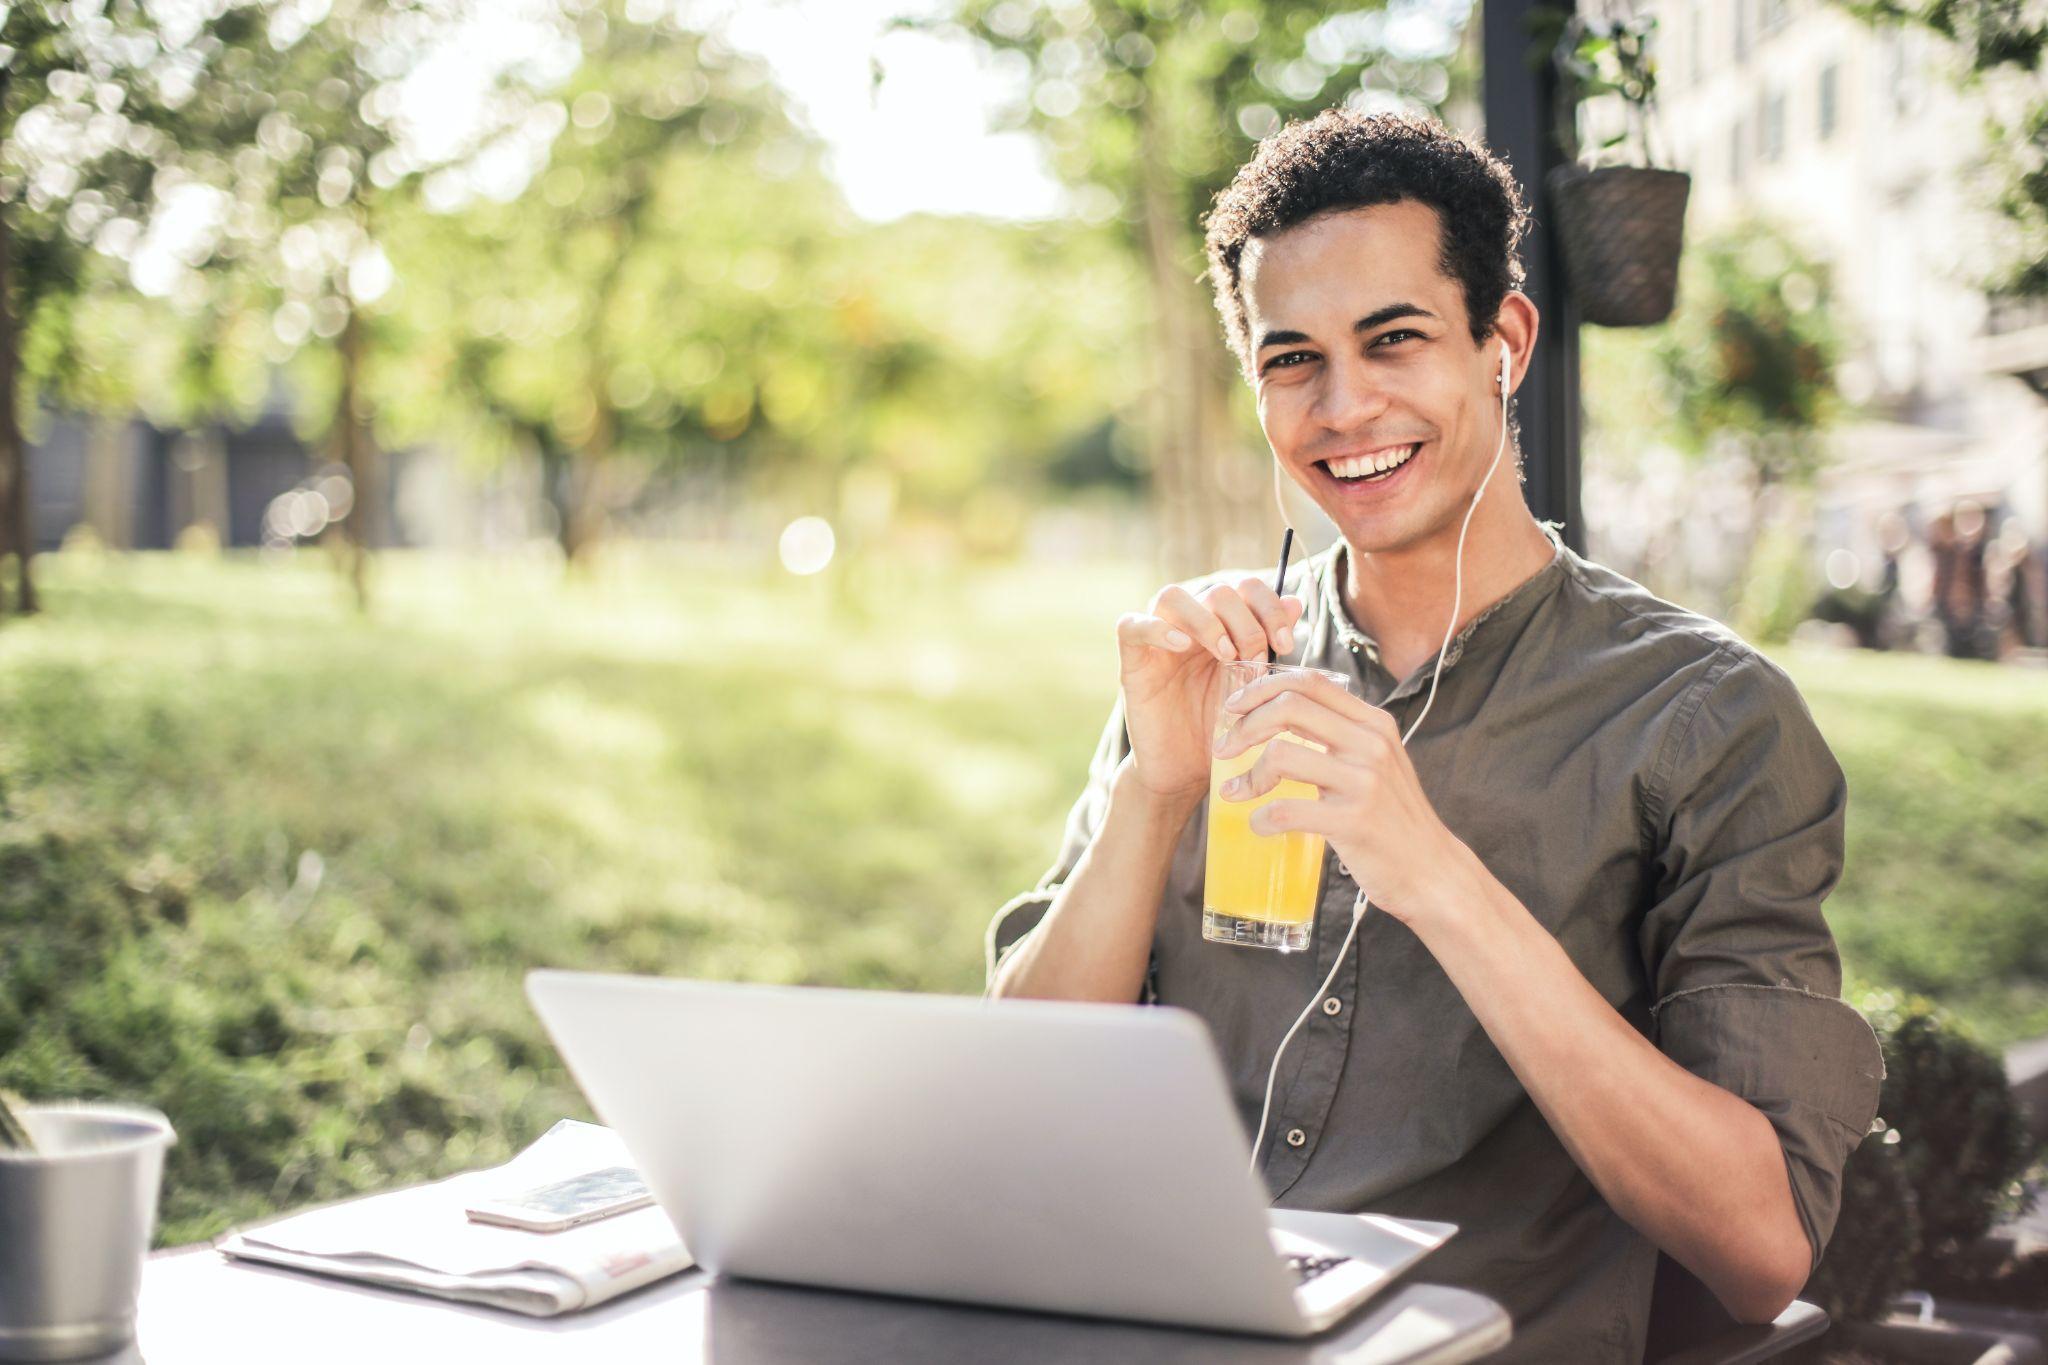 Photo of men drinking juice and using his laptop